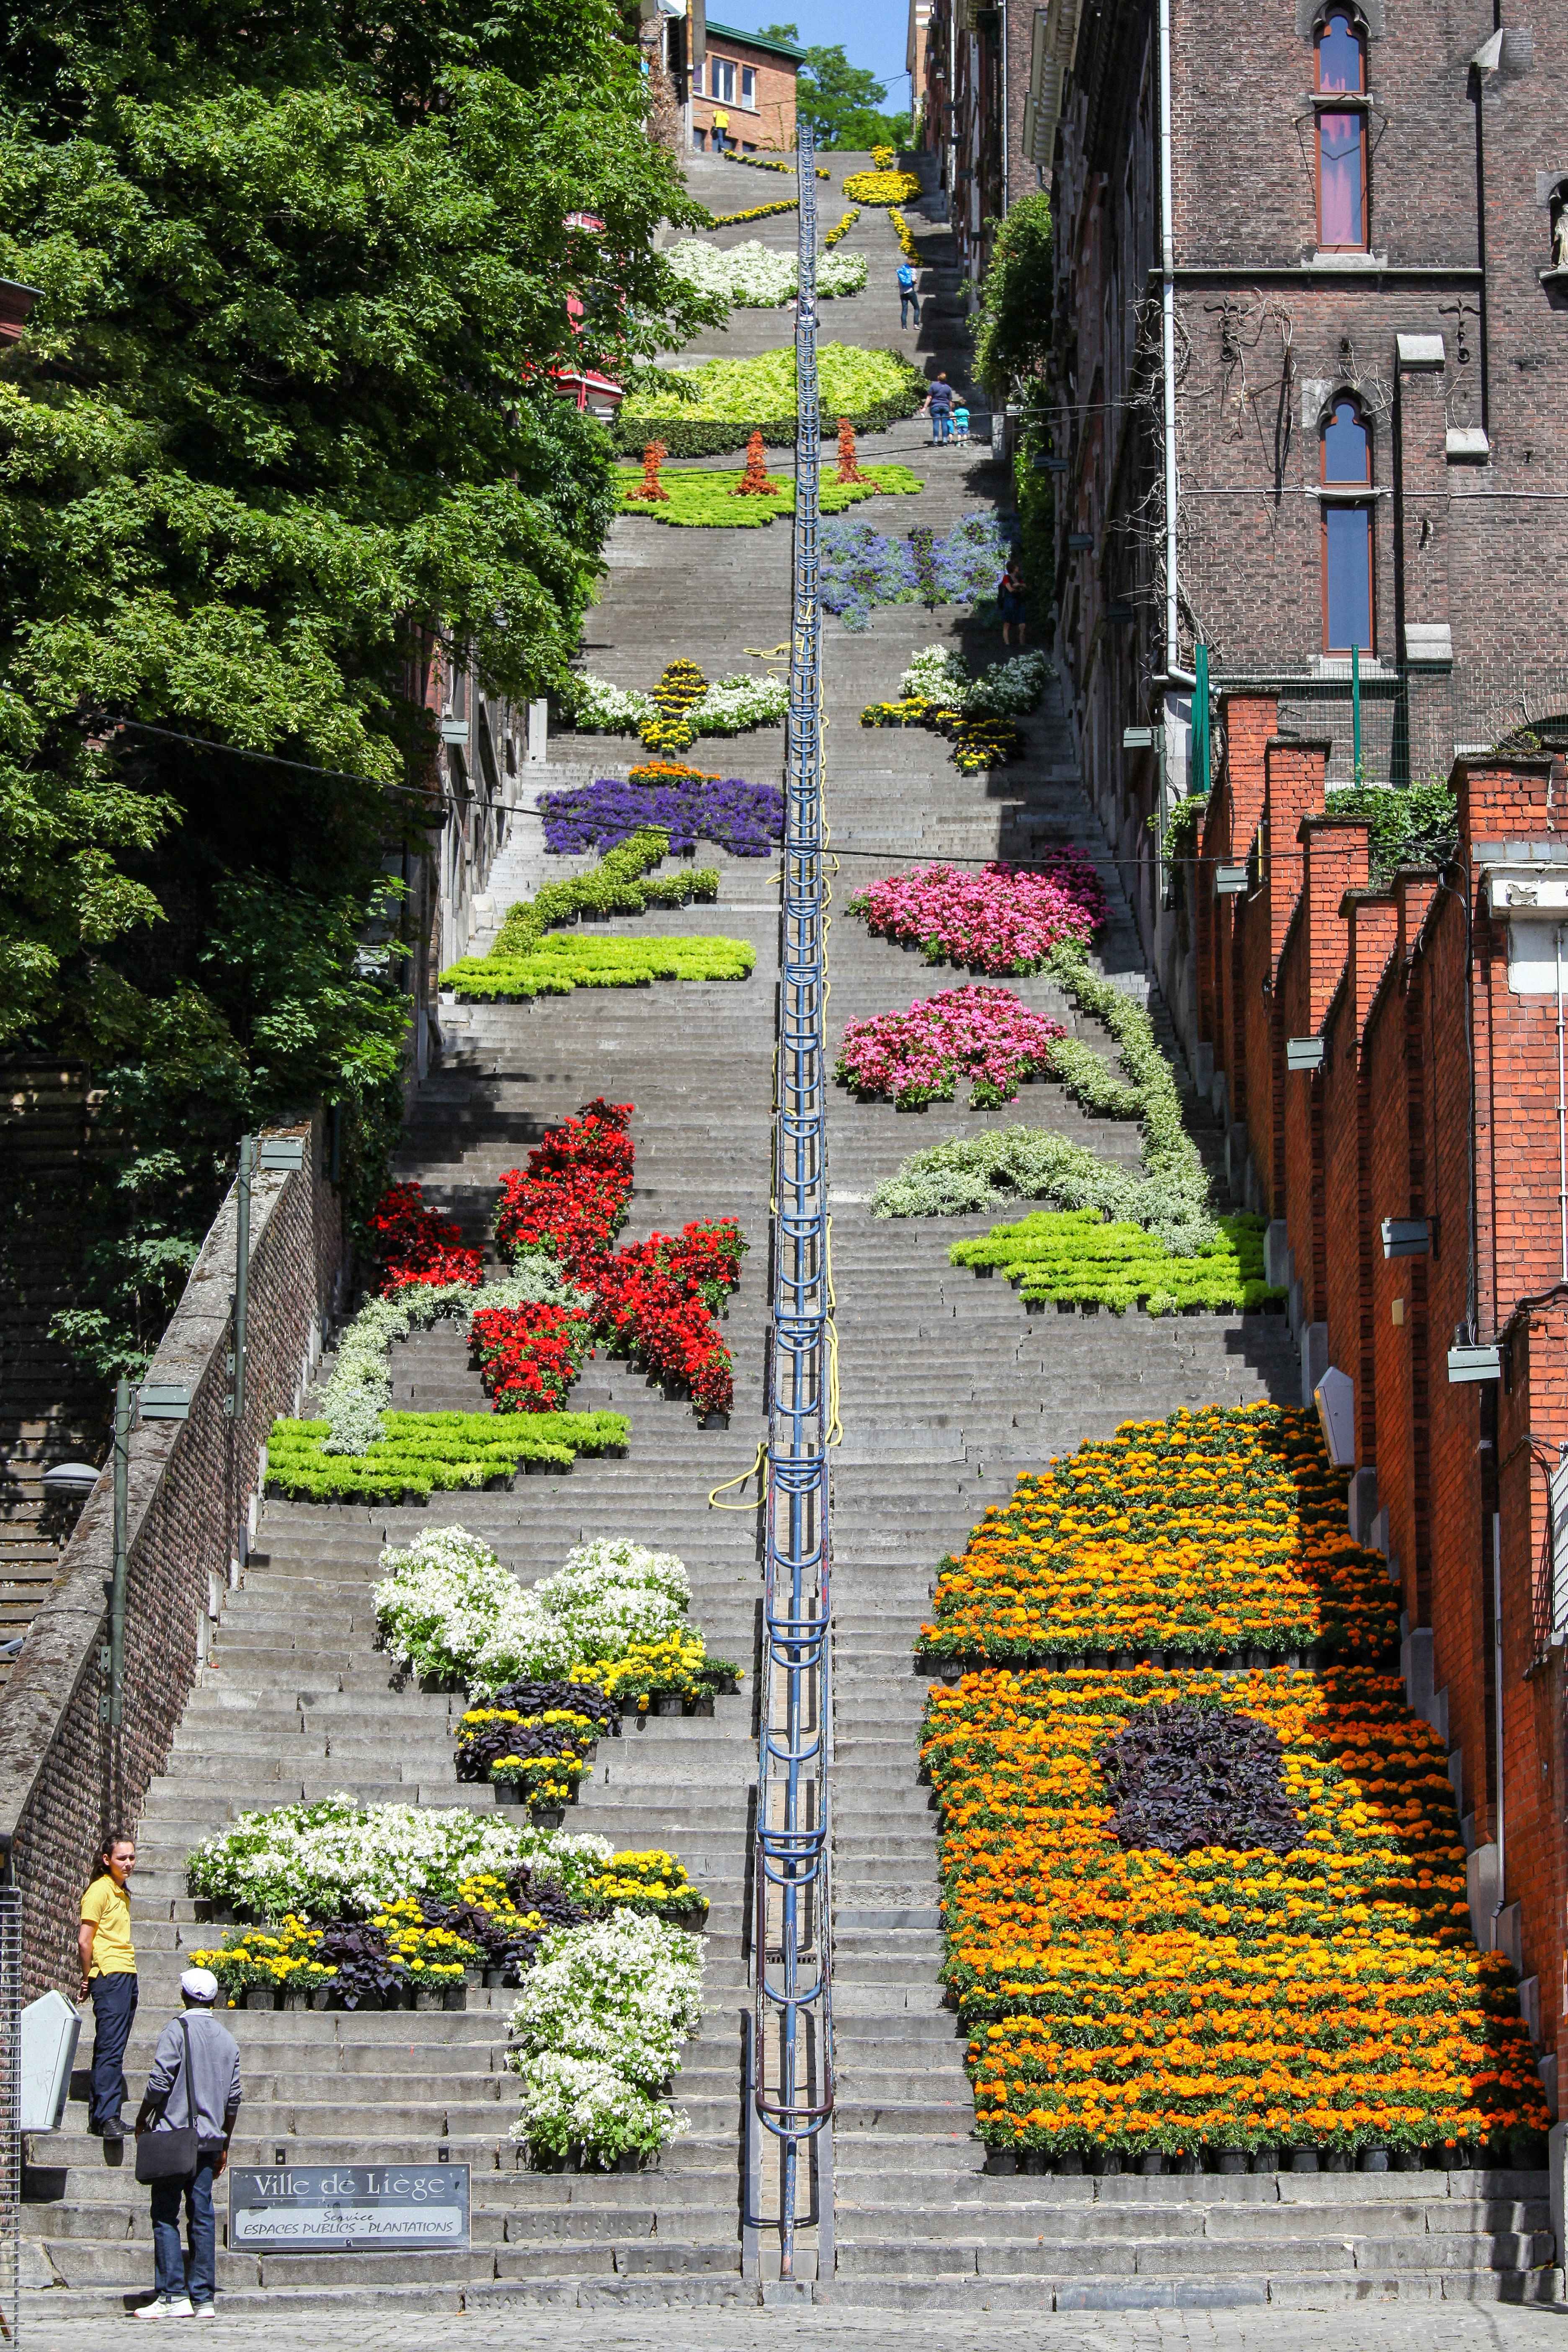 Admire thousand of blooms decorating the Buren Mountain in Liège